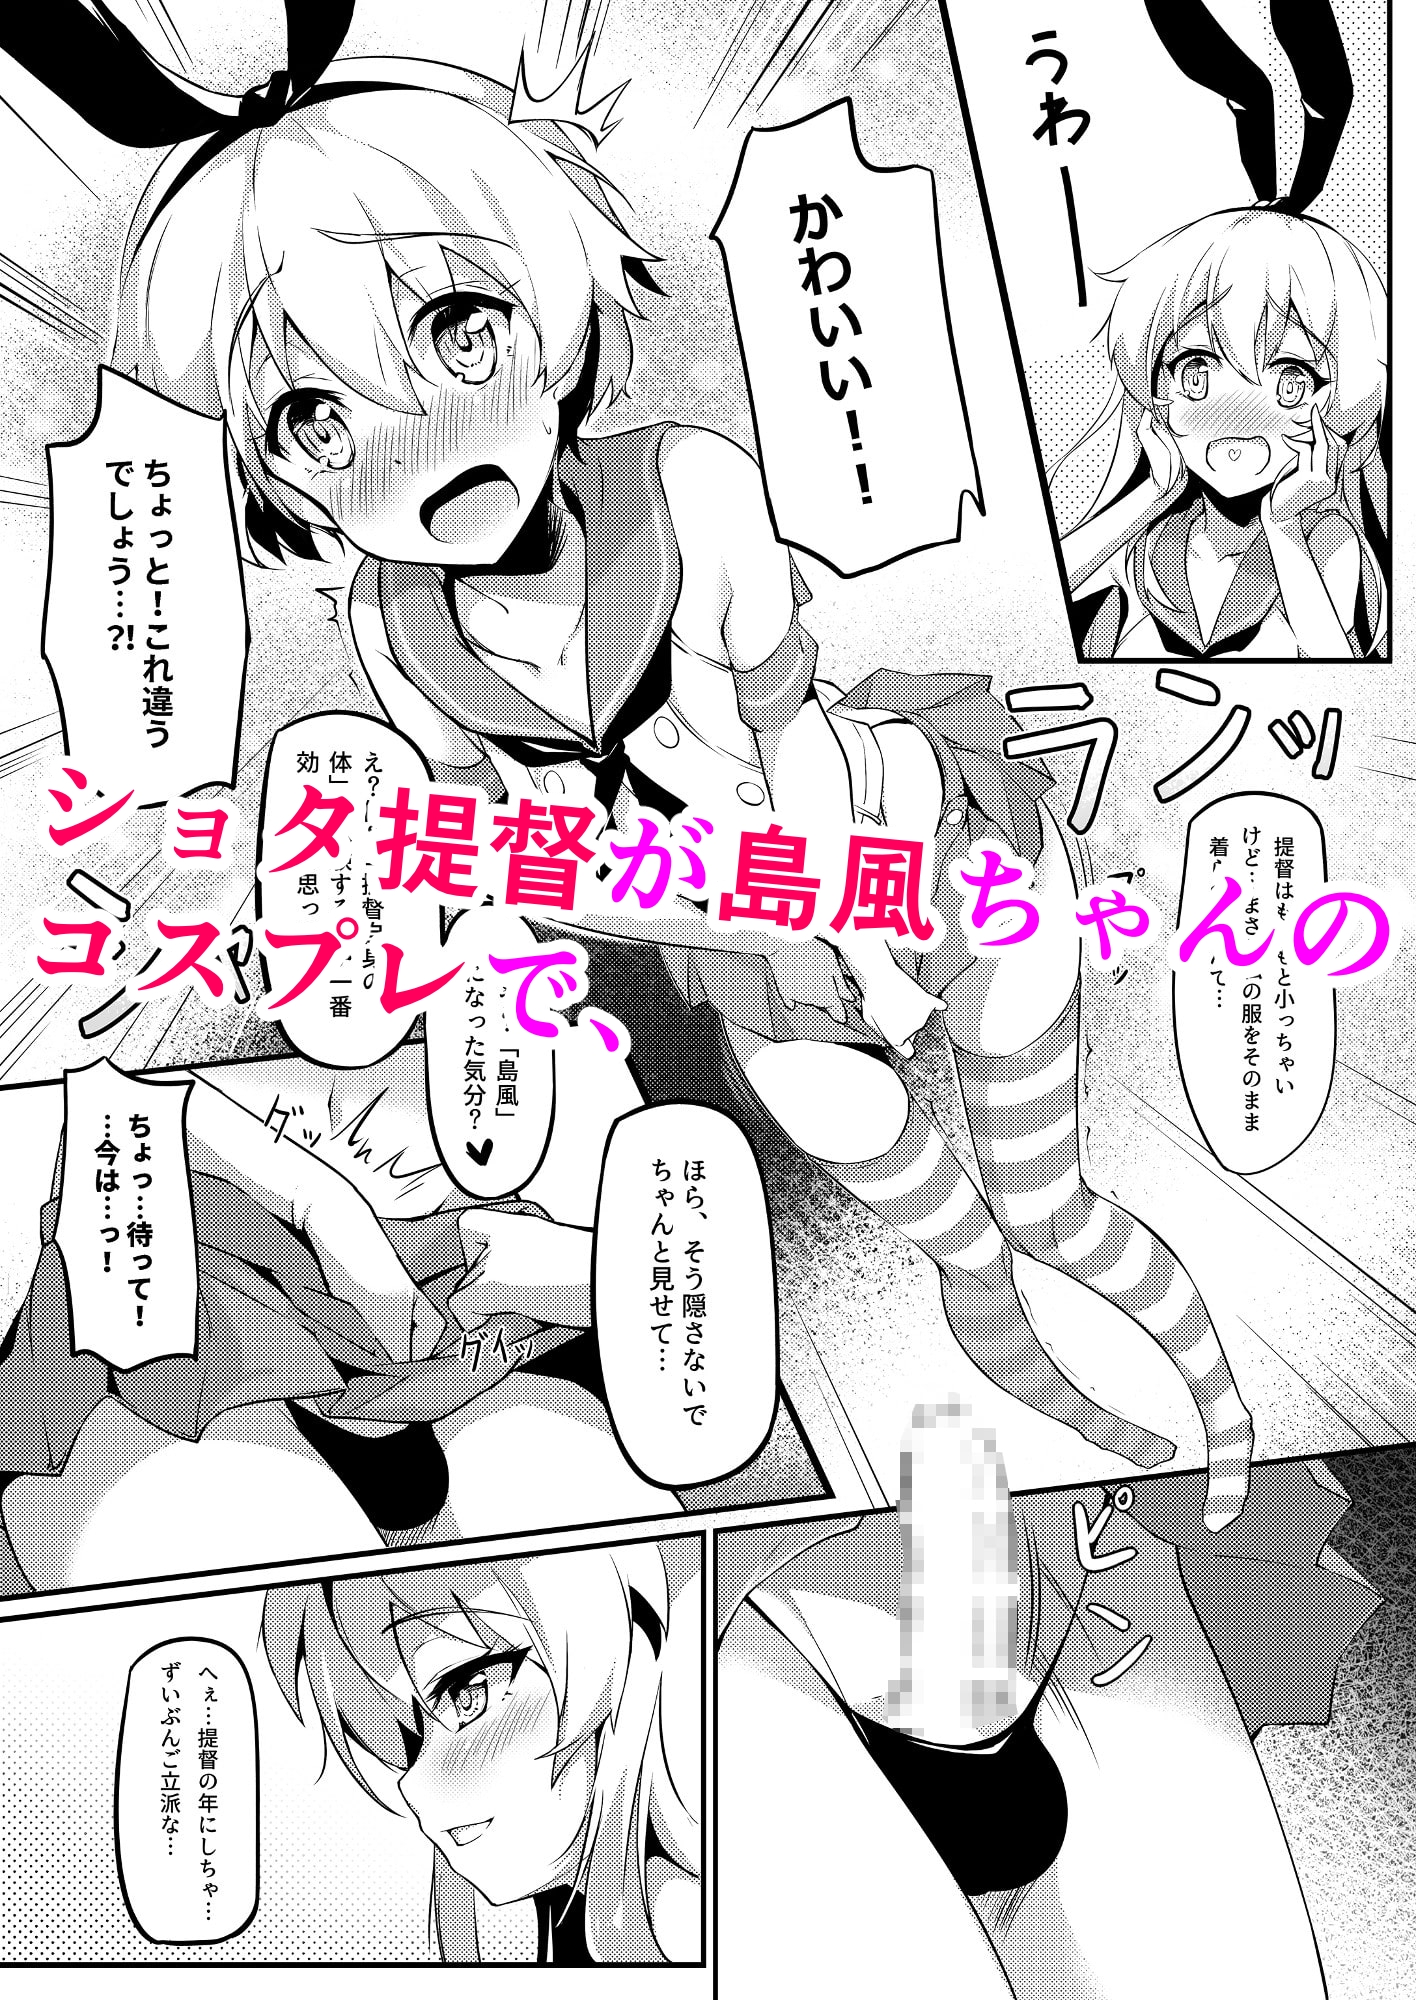 Shimakaze won't stop till the admiral's shota-c*ck is sorely empty!